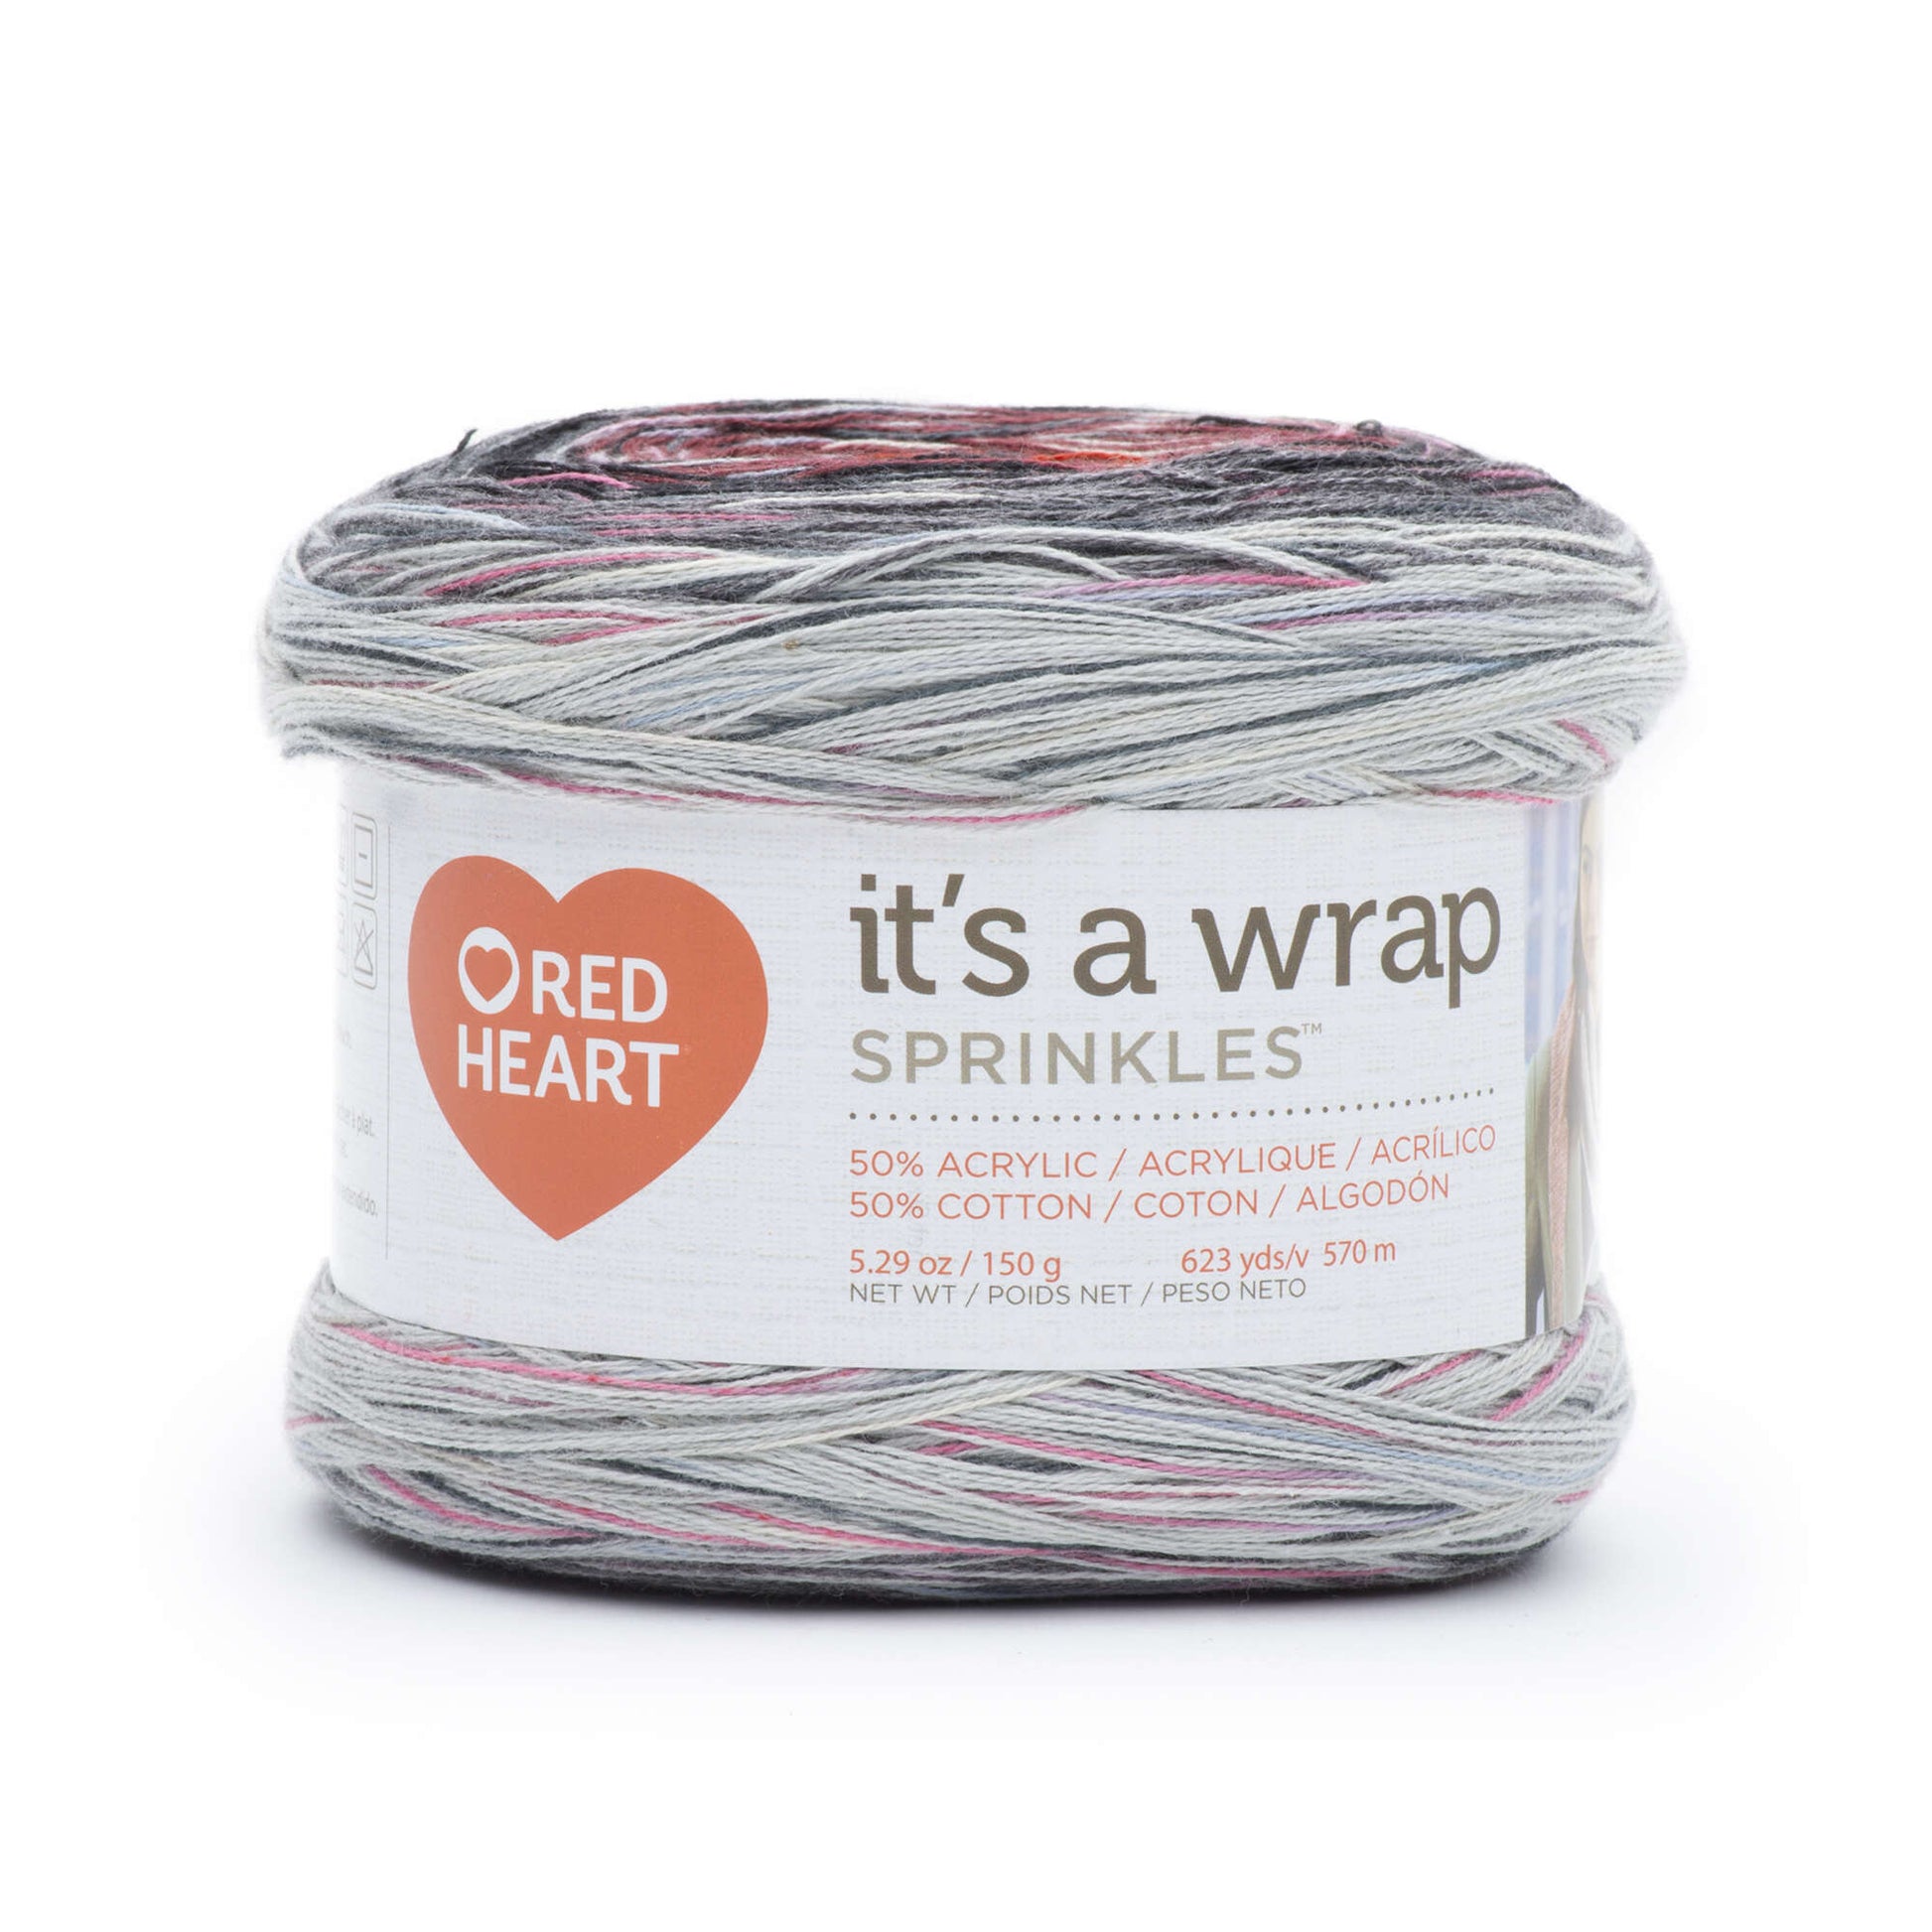 Red Heart It's a Wrap Sprinkles Yarn - Clearance shades Red Velvet